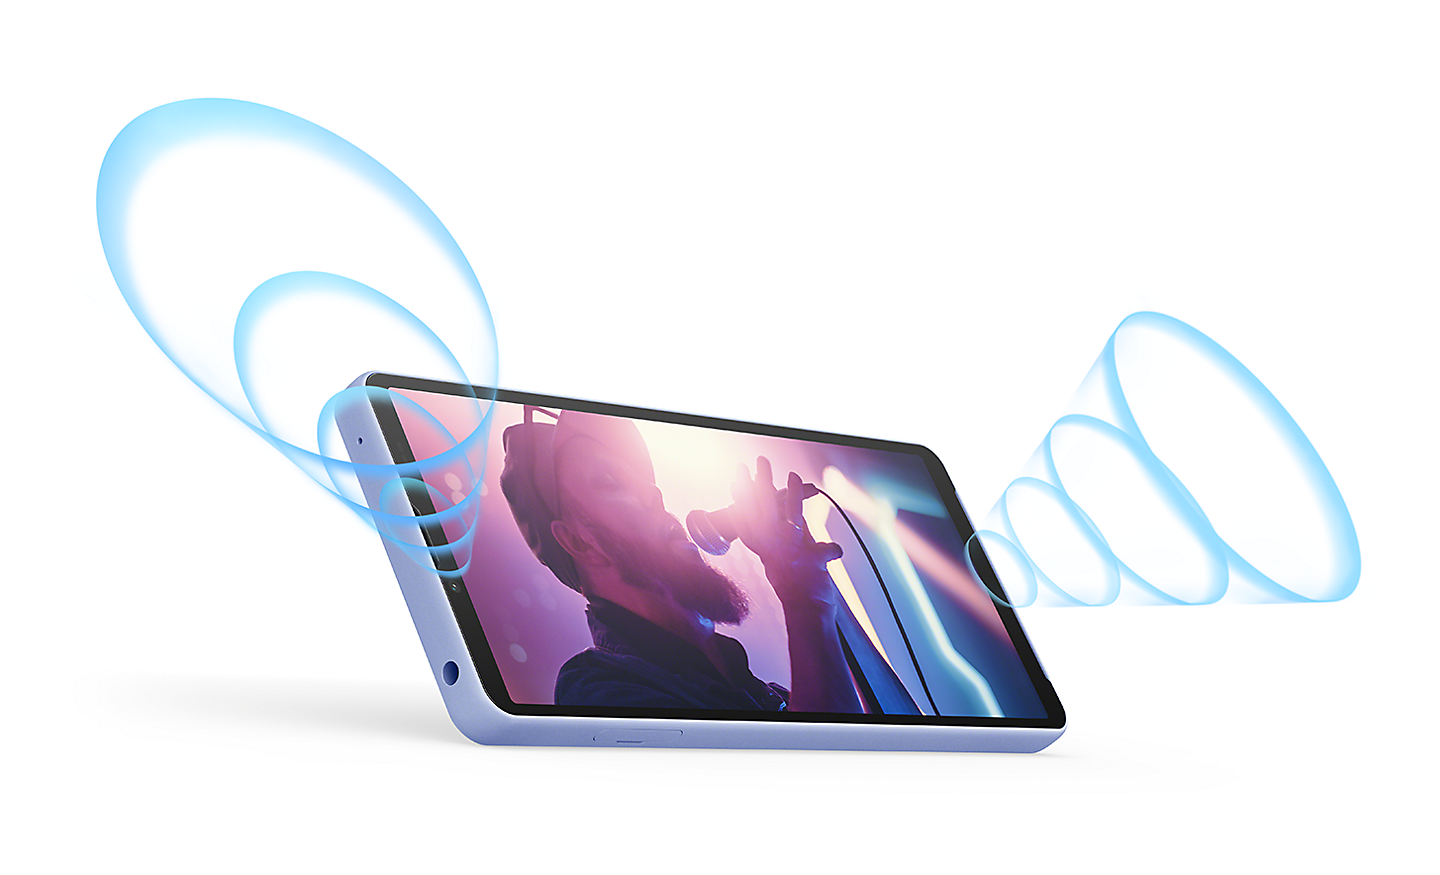 Xperia 10 V in landscape position, displaying an image of a singer. Illustrated blue sound waves radiate from its front stereo speakers.